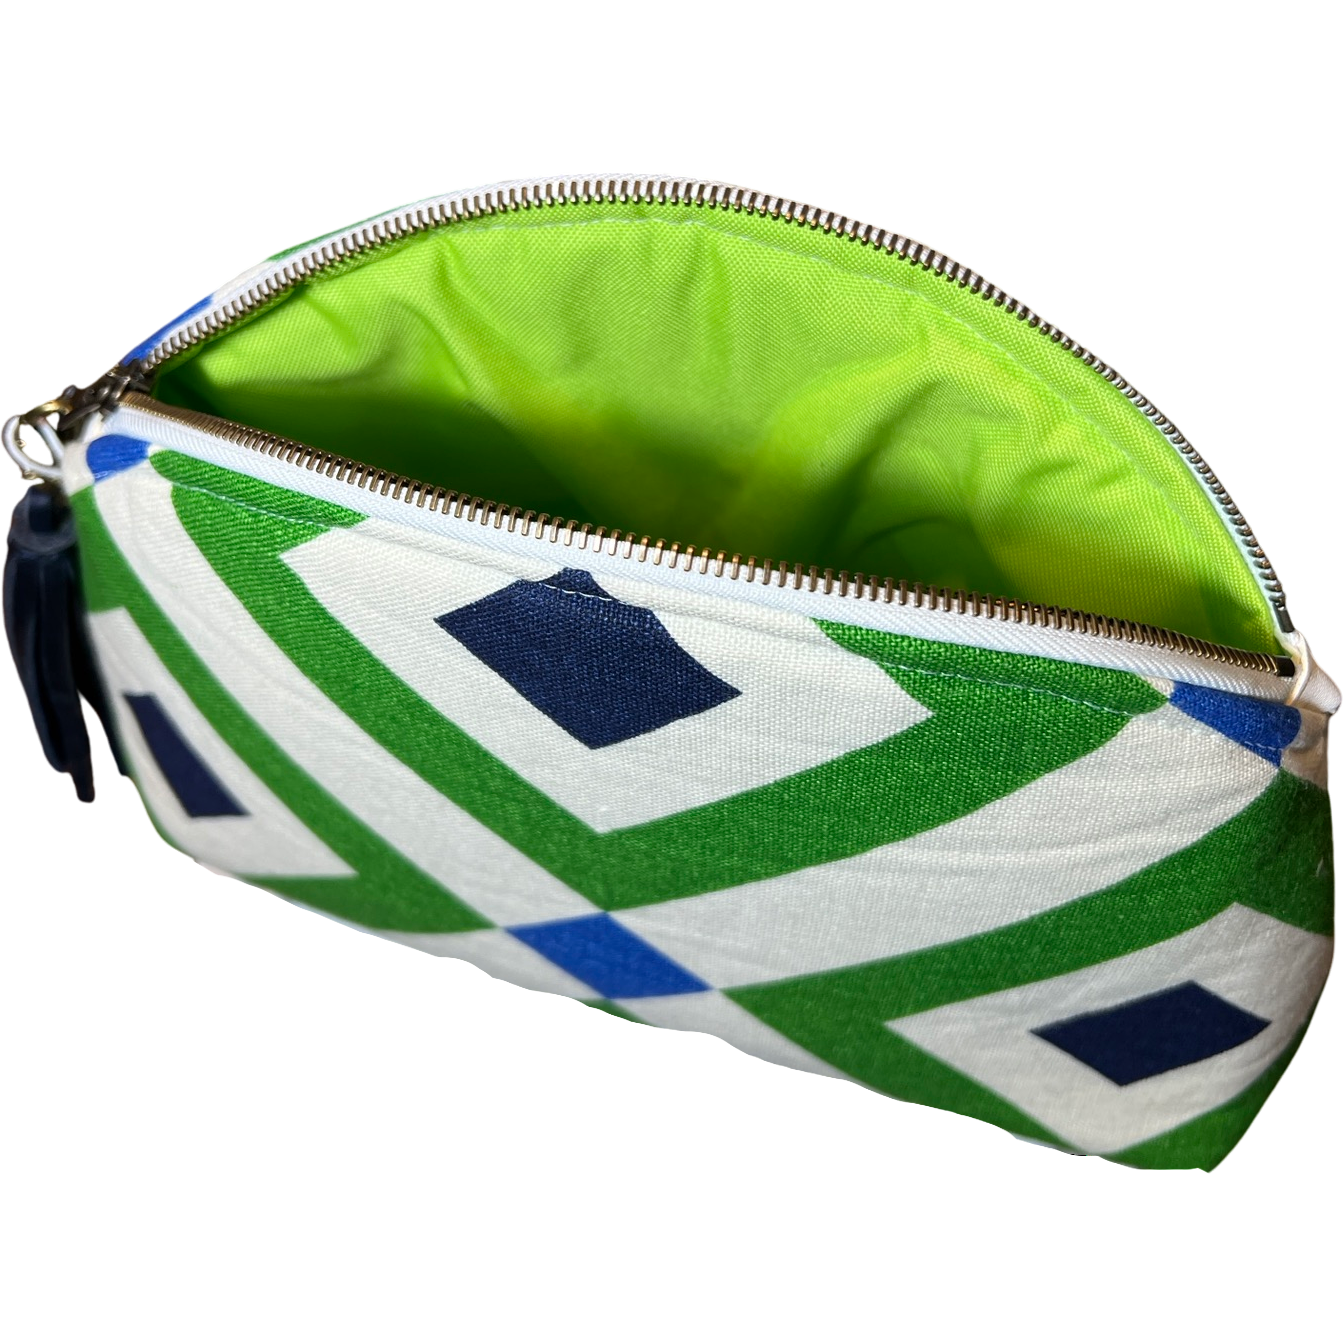 Green and Navy Geometric Performance Pouch